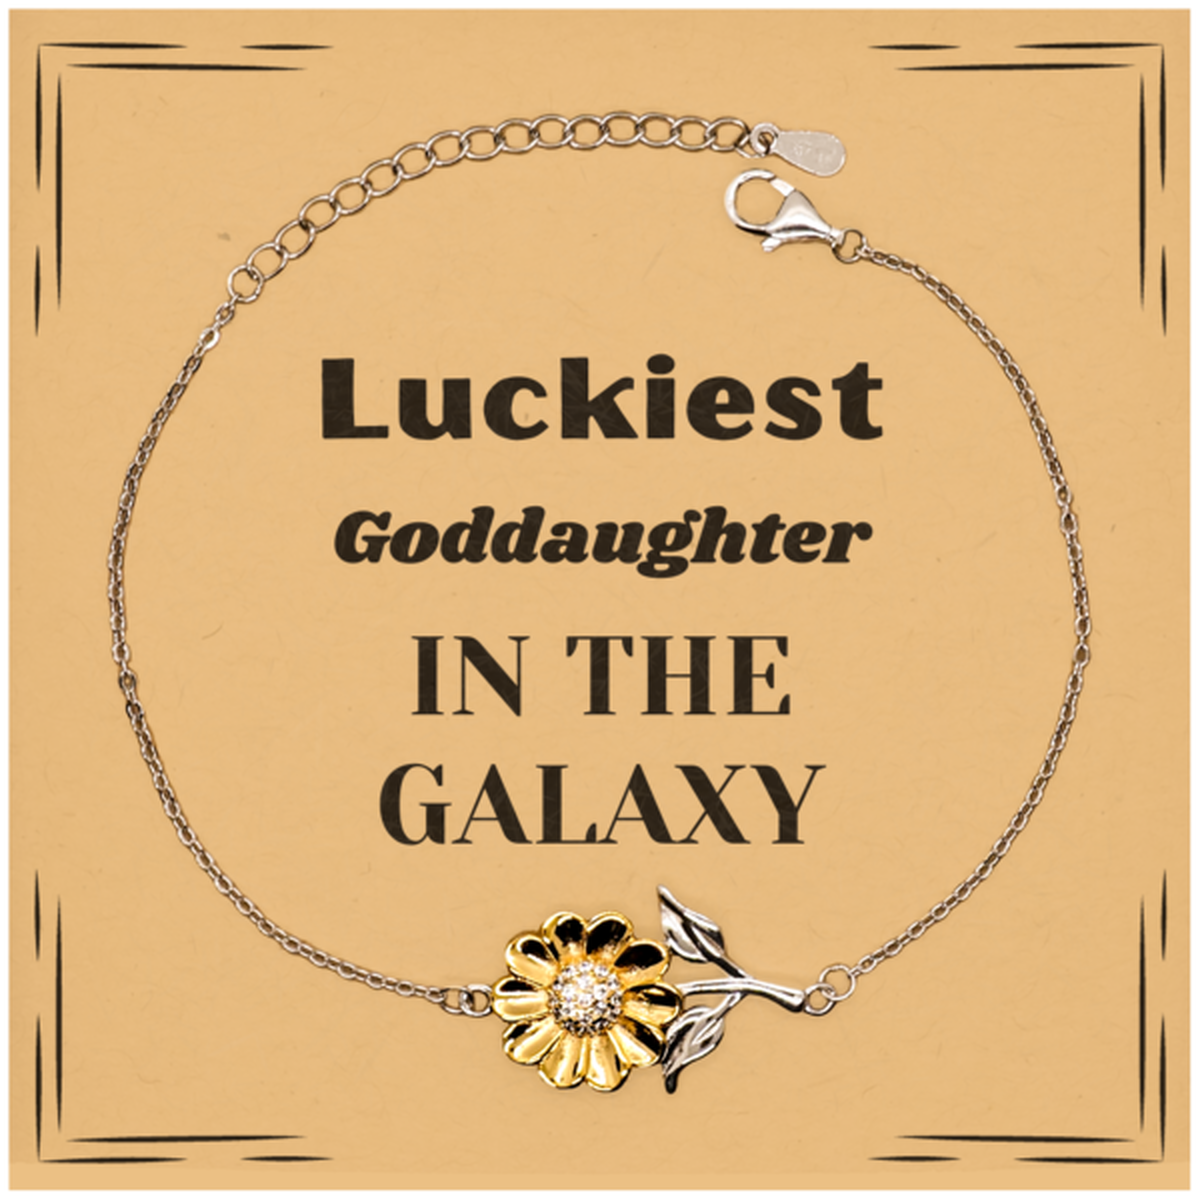 Luckiest Goddaughter in the Galaxy, To My Goddaughter Message Card Gifts, Christmas Goddaughter Sunflower Bracelet Gifts, X-mas Birthday Unique Gifts For Goddaughter Men Women